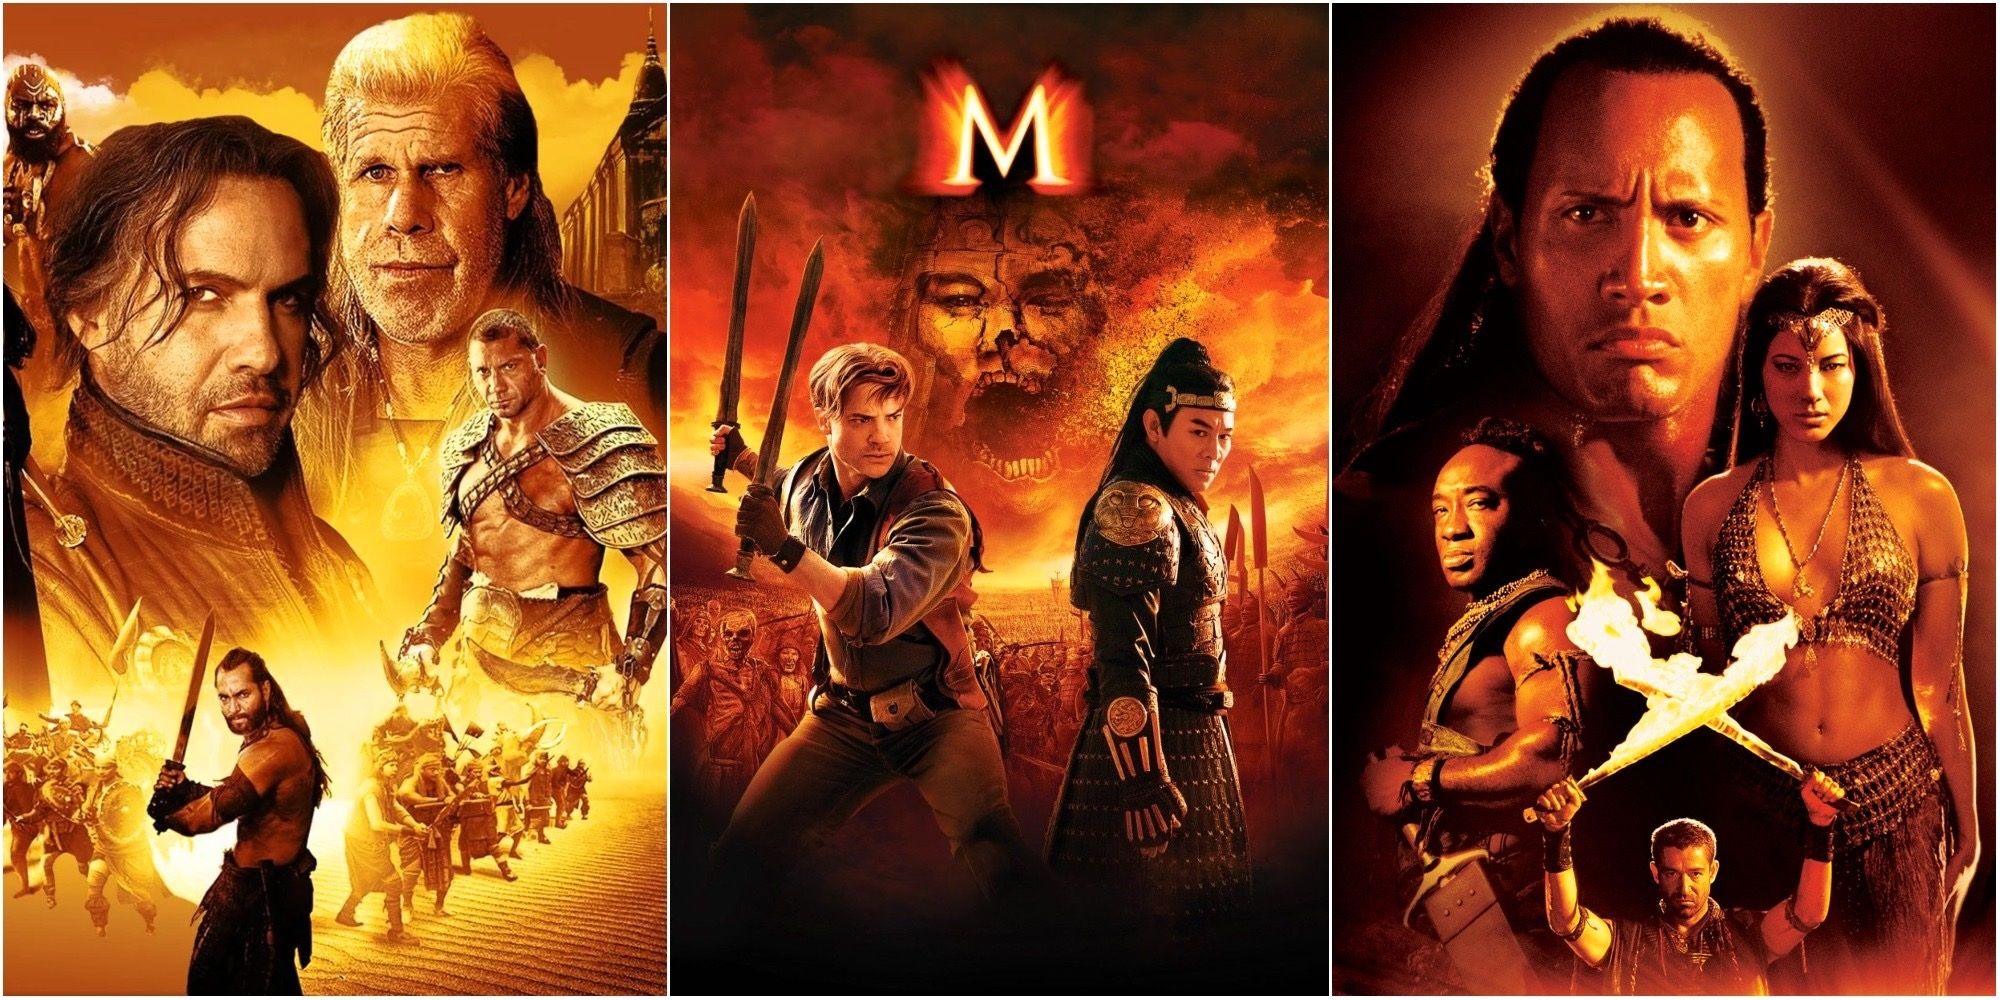 the mummy and the scorpion king movies in order